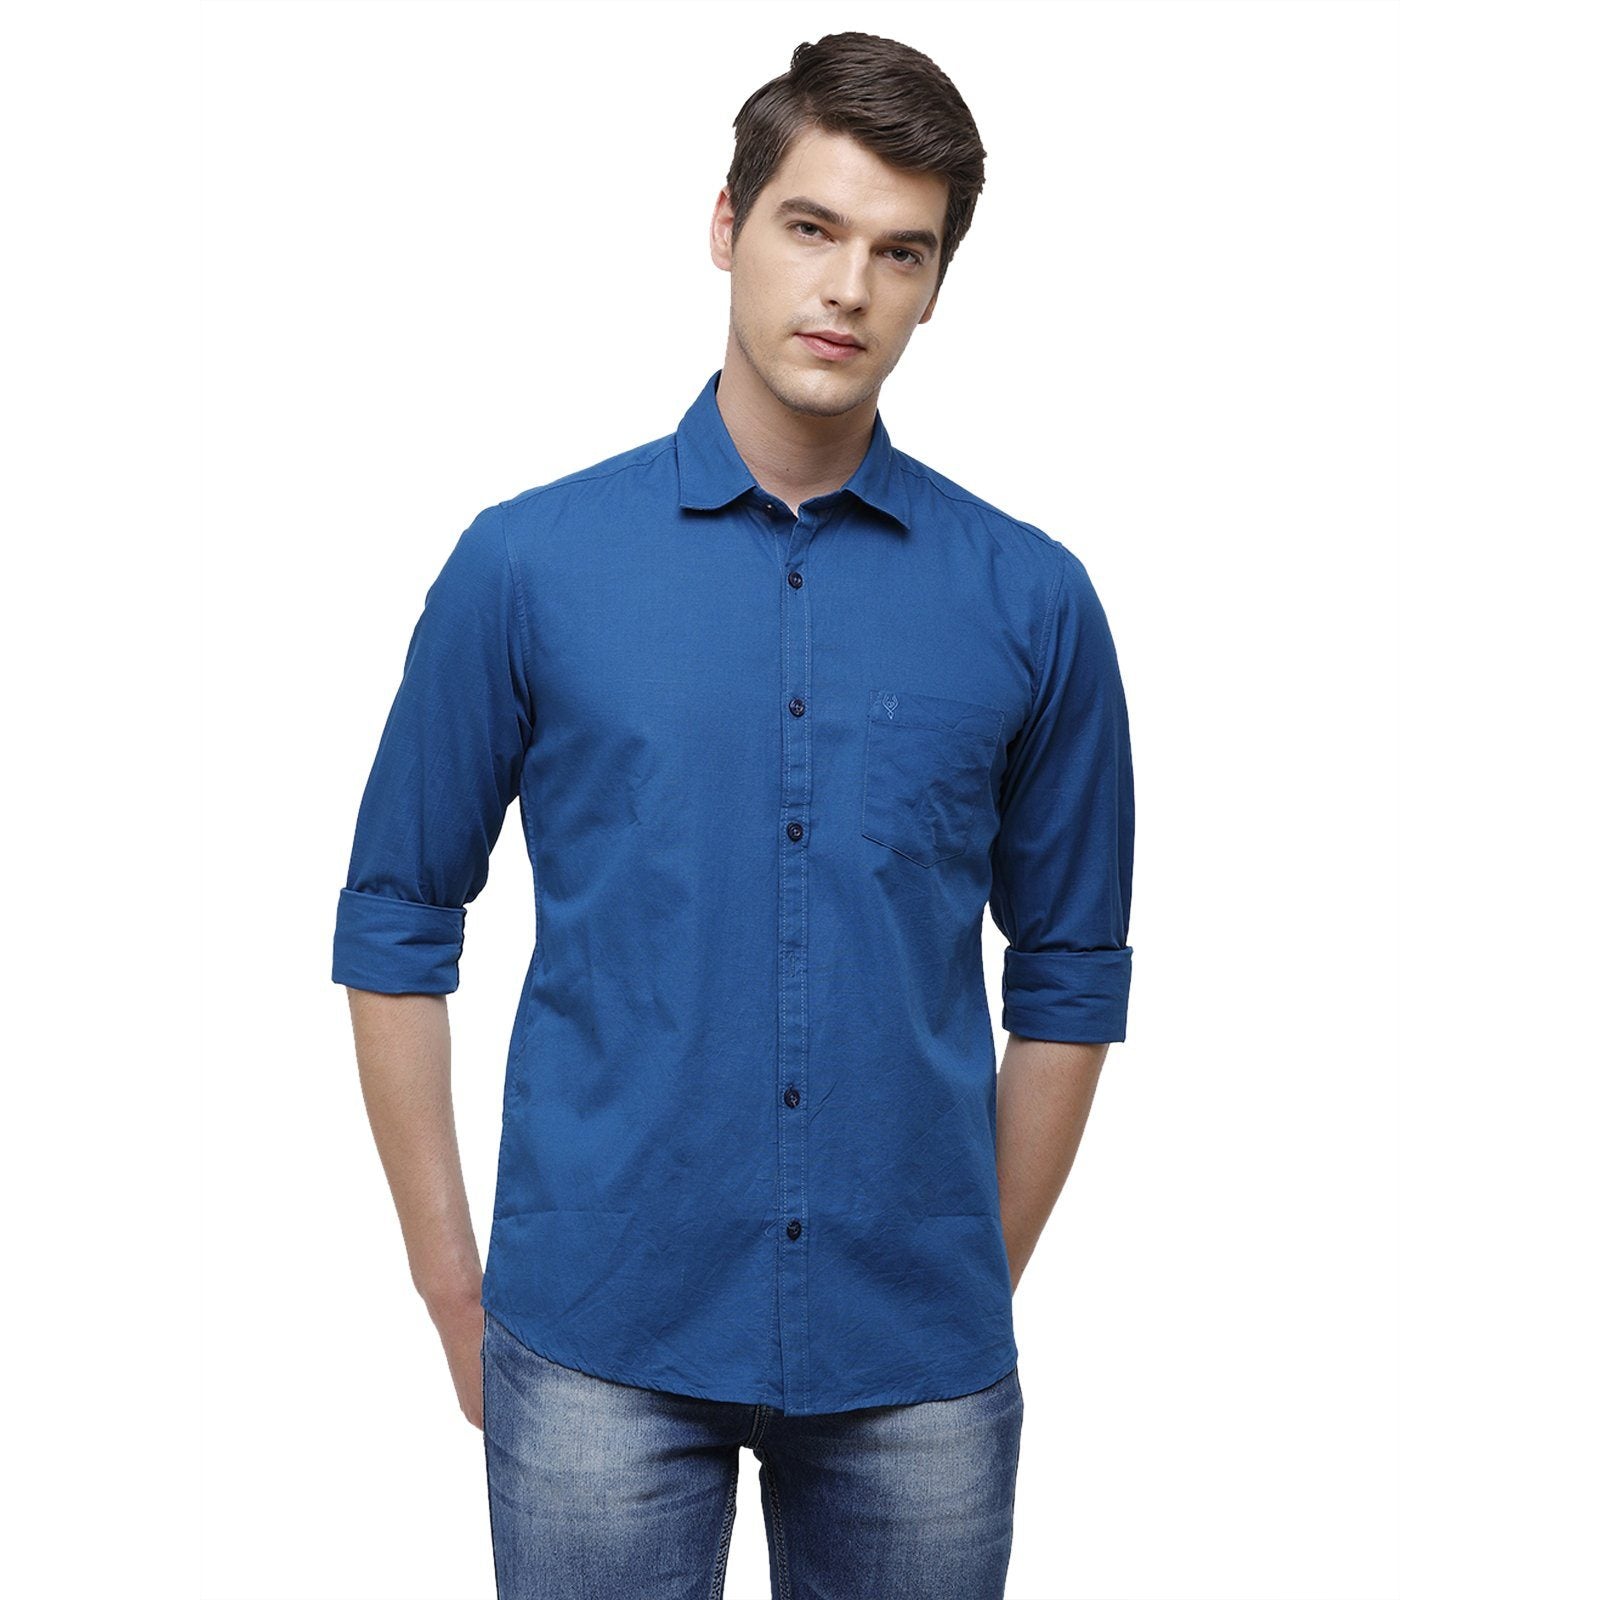 Classic Polo Men's Smart Fit Collar Neck Full Sleeve Solid Cotton Royal Blue Woven Shirt SM1-69 H-FS-SLD-SF Shirts Classic Polo 